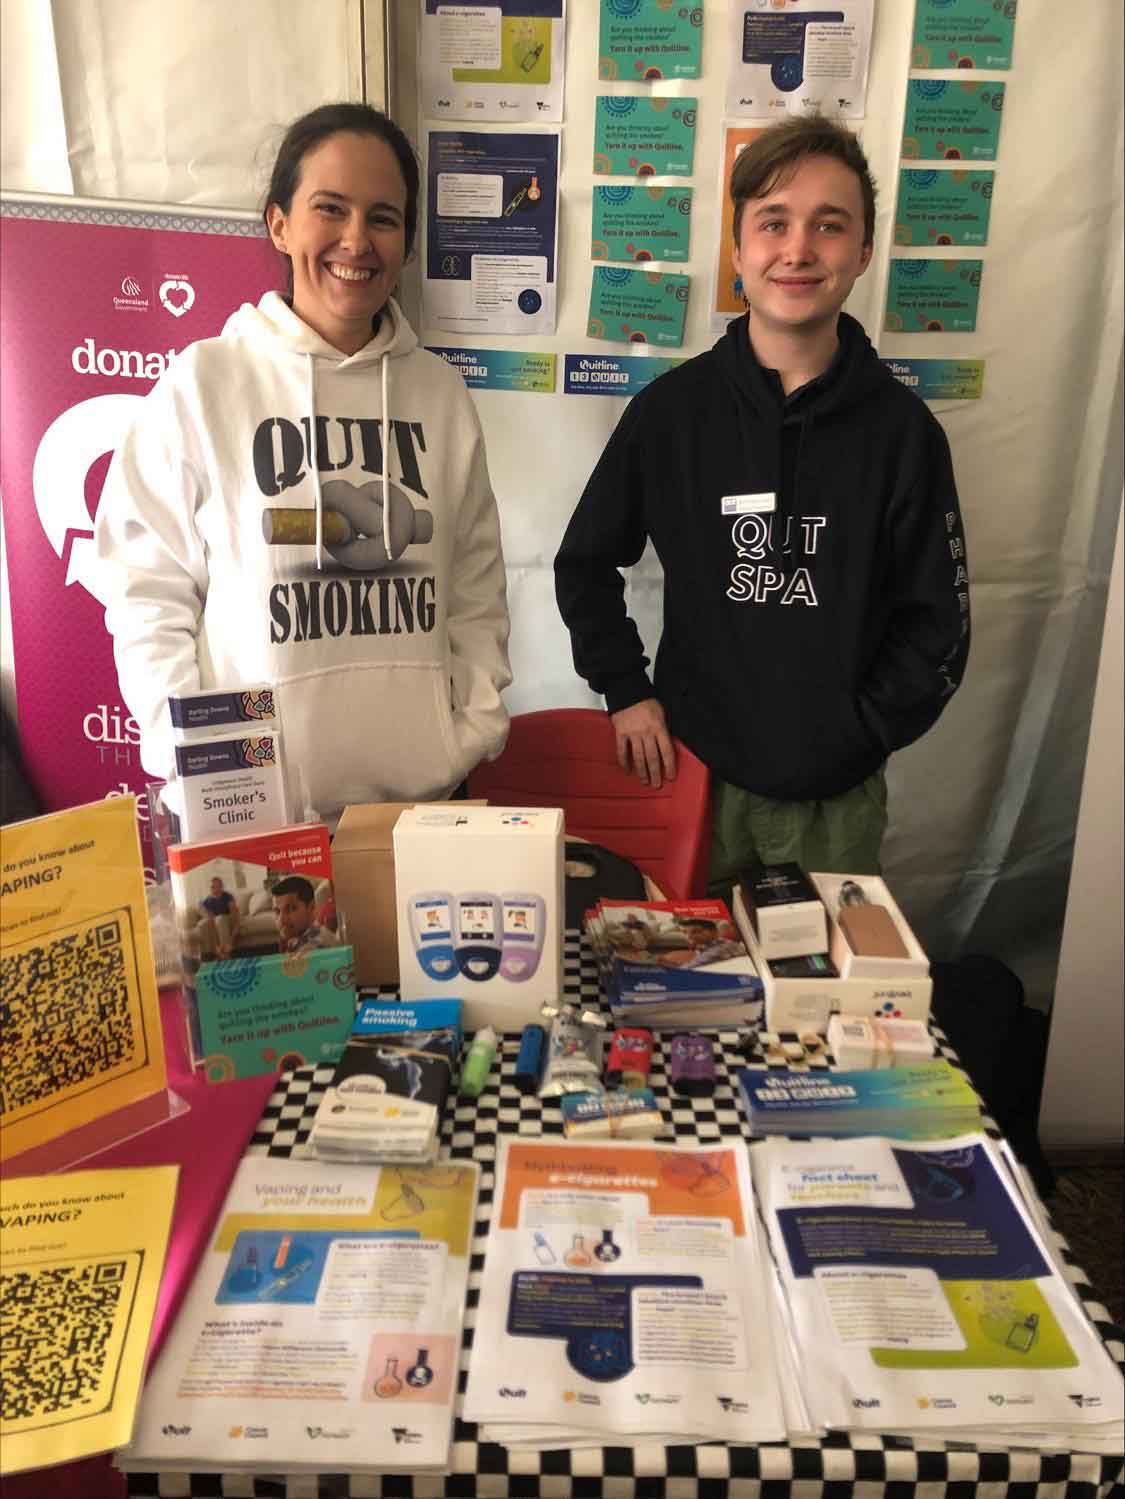 Two phamacy students a male and a female wearing 'Quit smoking' shirts stand behind a table displaying pharmacy products at an industry event. 